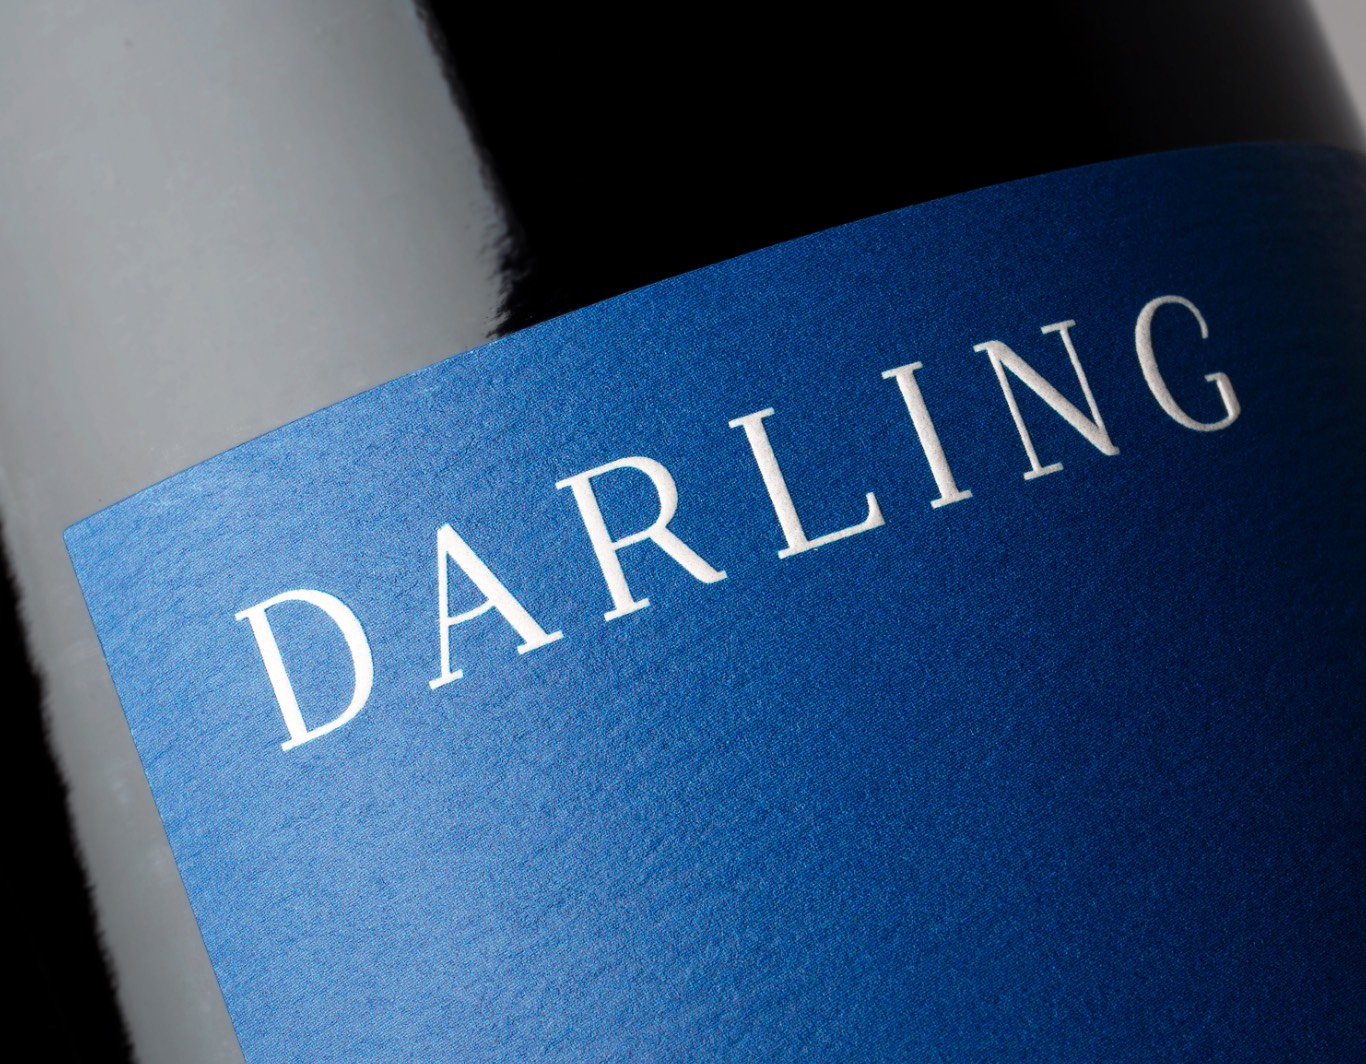 Crop of front label on a wine bottle with Darling Wines logo